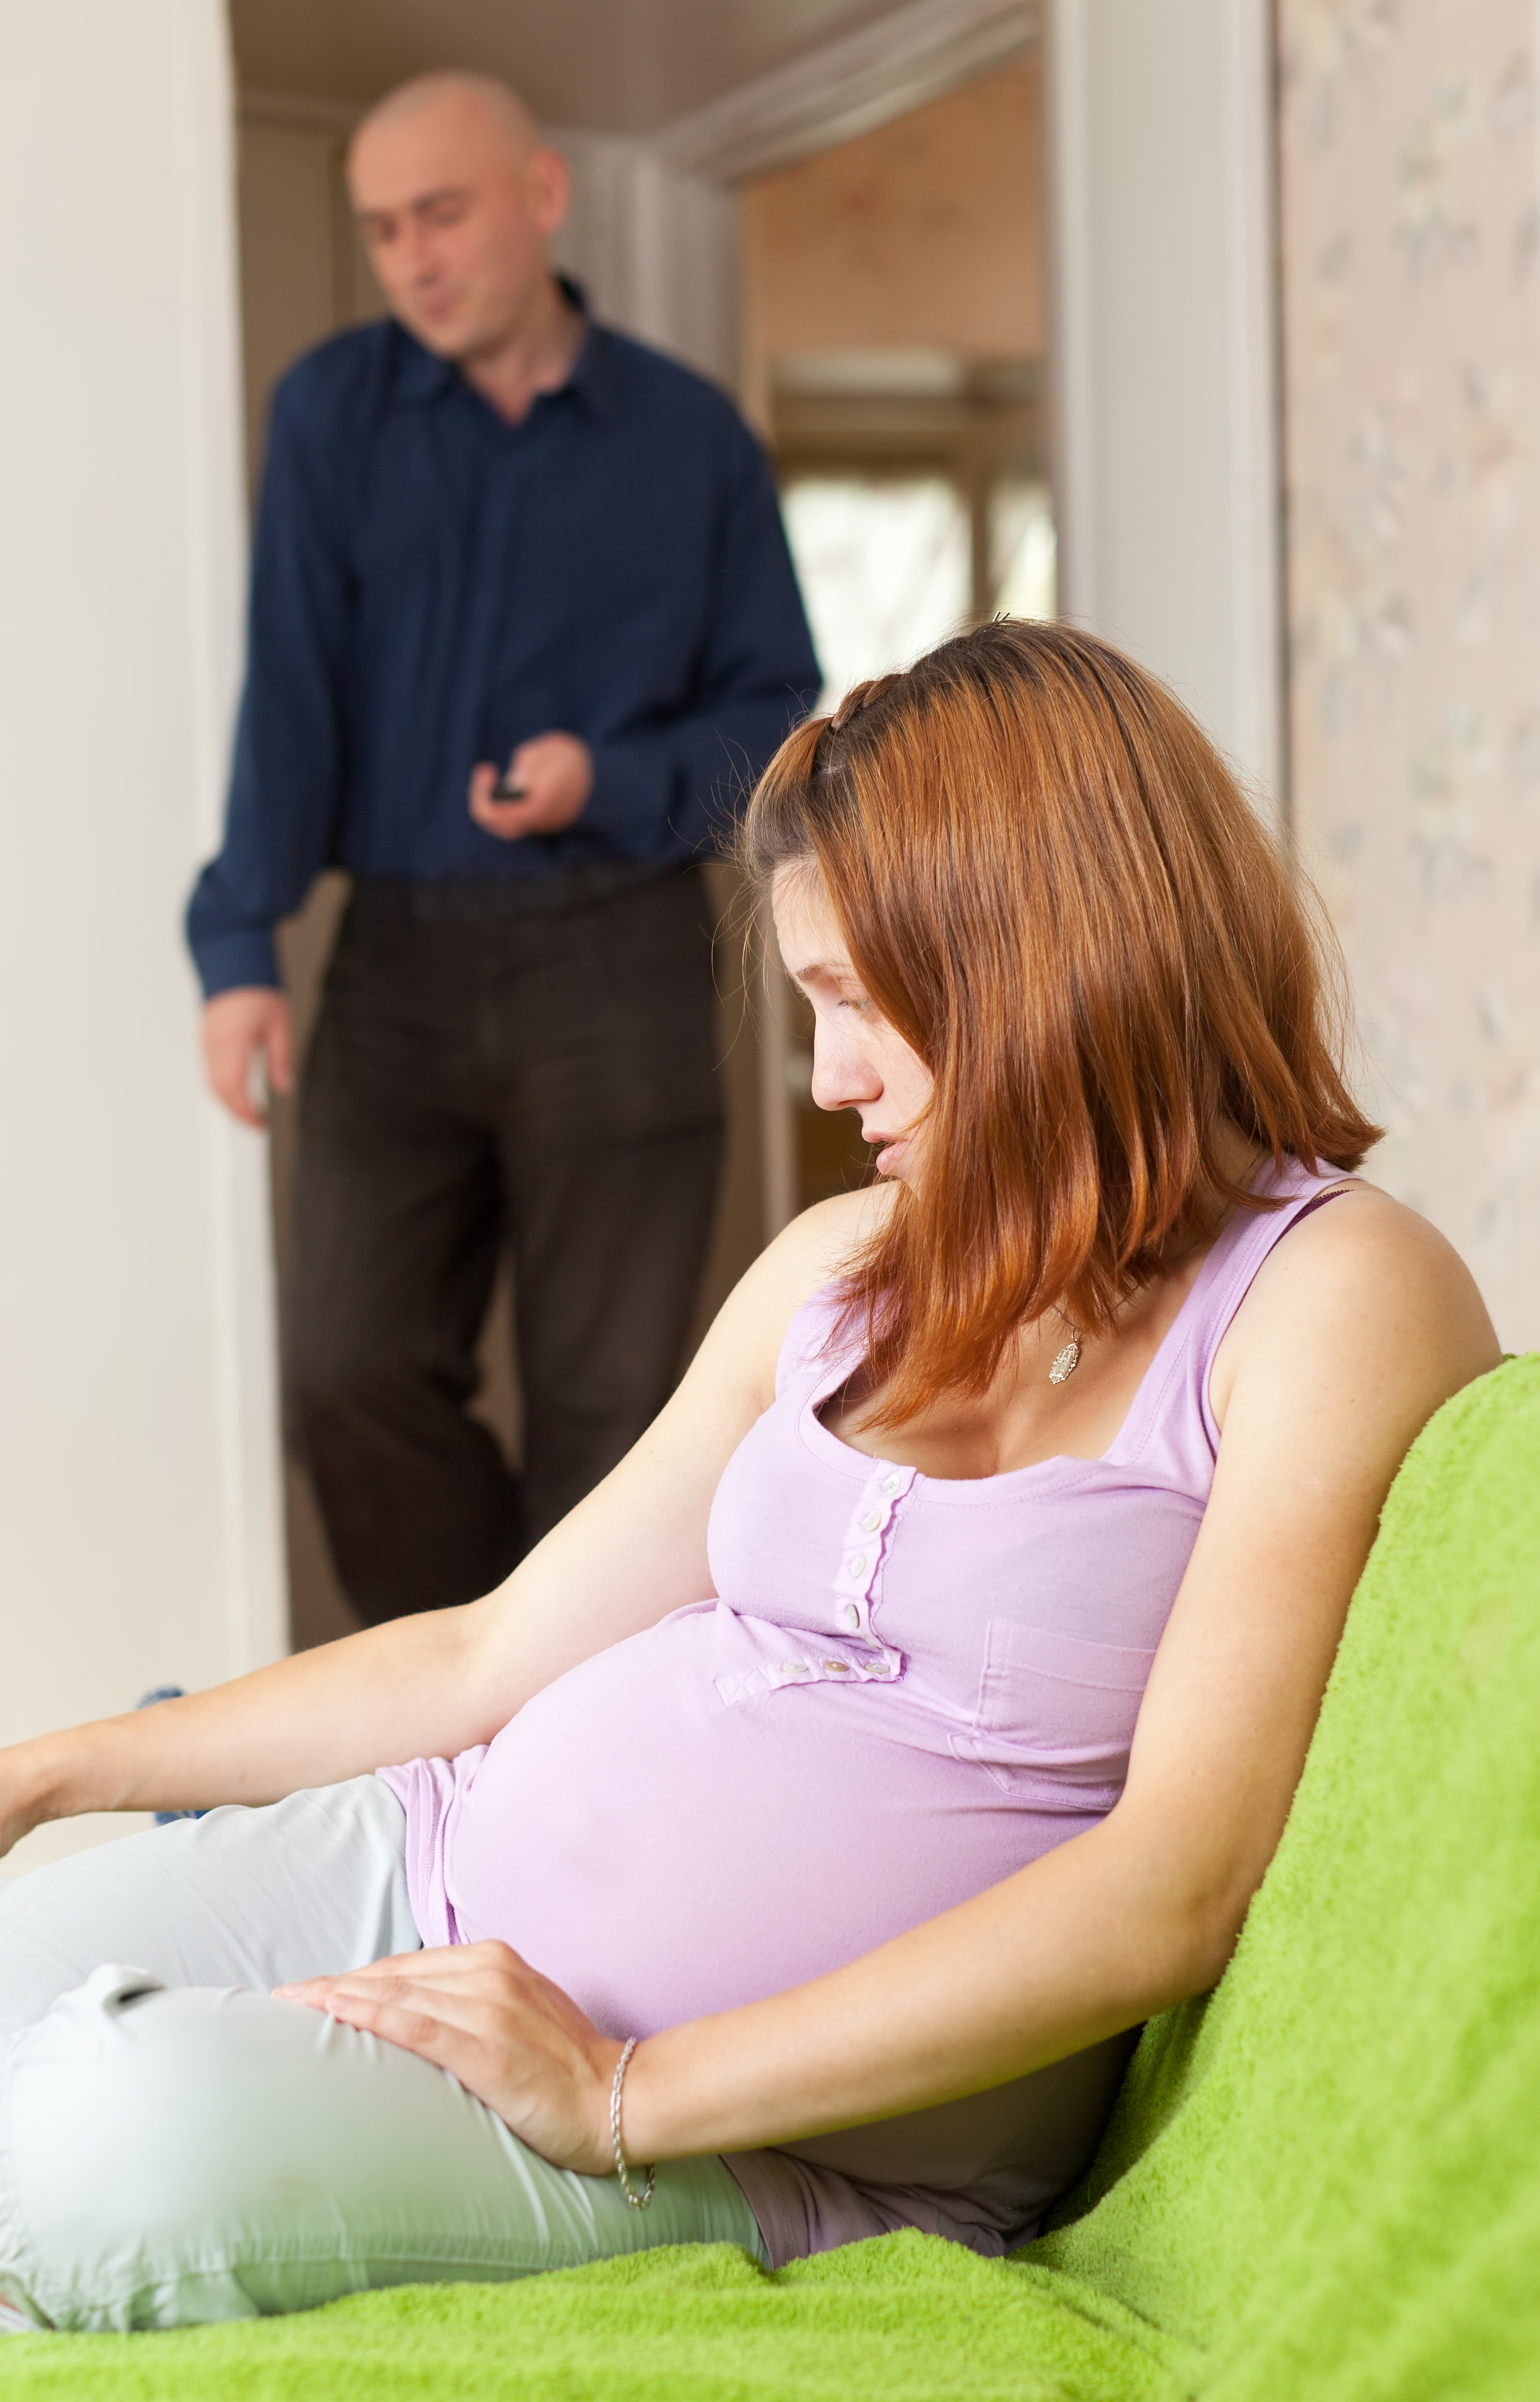 A pregnant woman looking down as a man looks away in the background | Source: Shutterstock